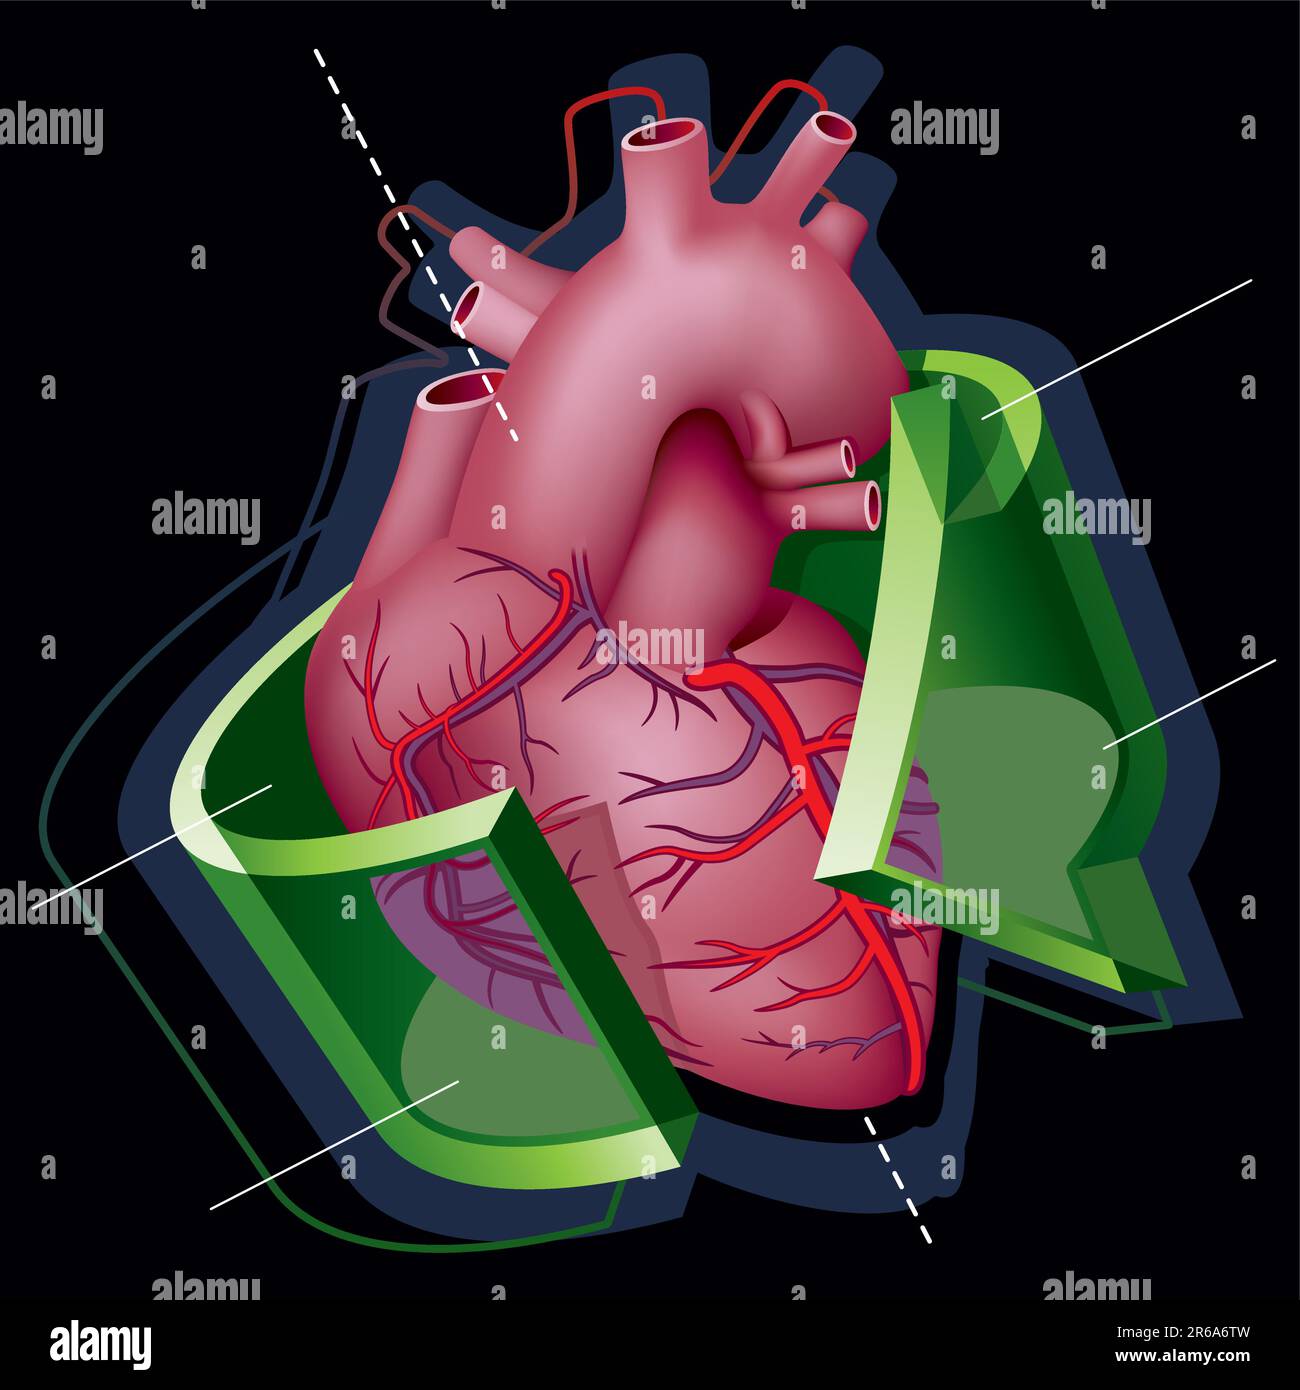 Human Heart with Axes and Green Transparent Arrow around it on Black Background. Vector Illustration (EPS v8.0) Stock Vector